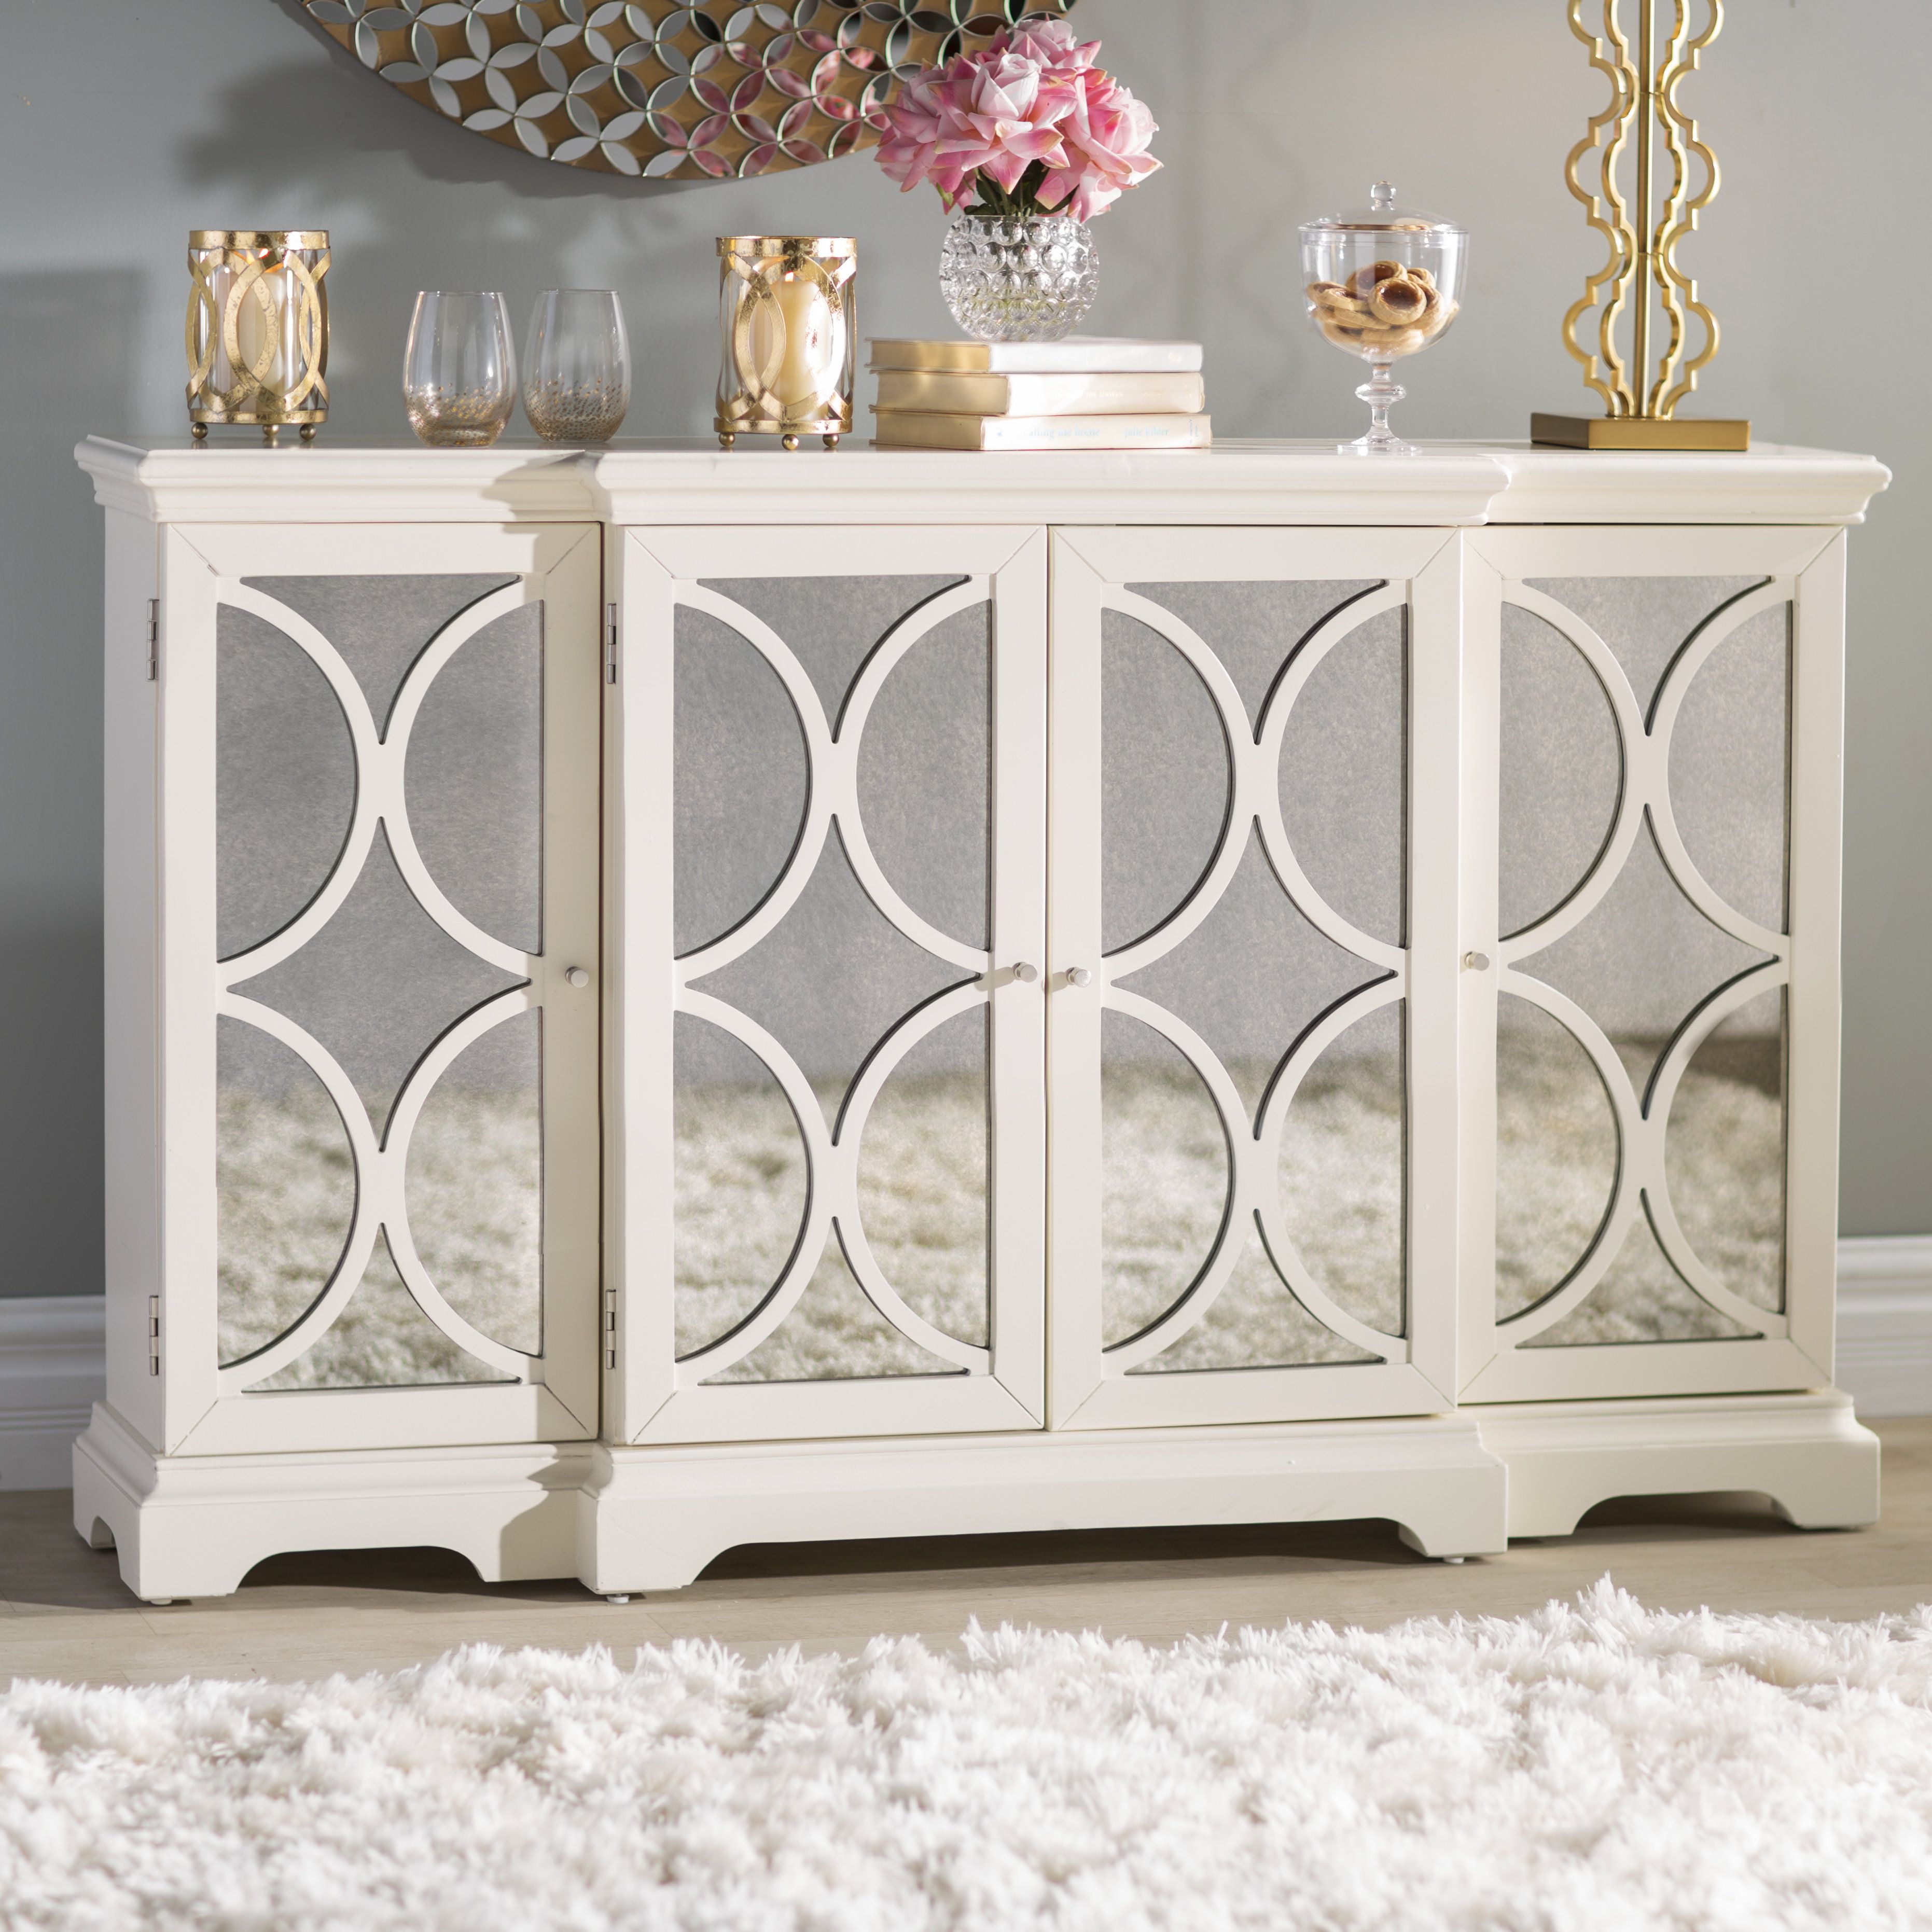 Cream Credenza | Wayfair Pertaining To Pale Pink Agate Wood Credenzas (View 12 of 30)